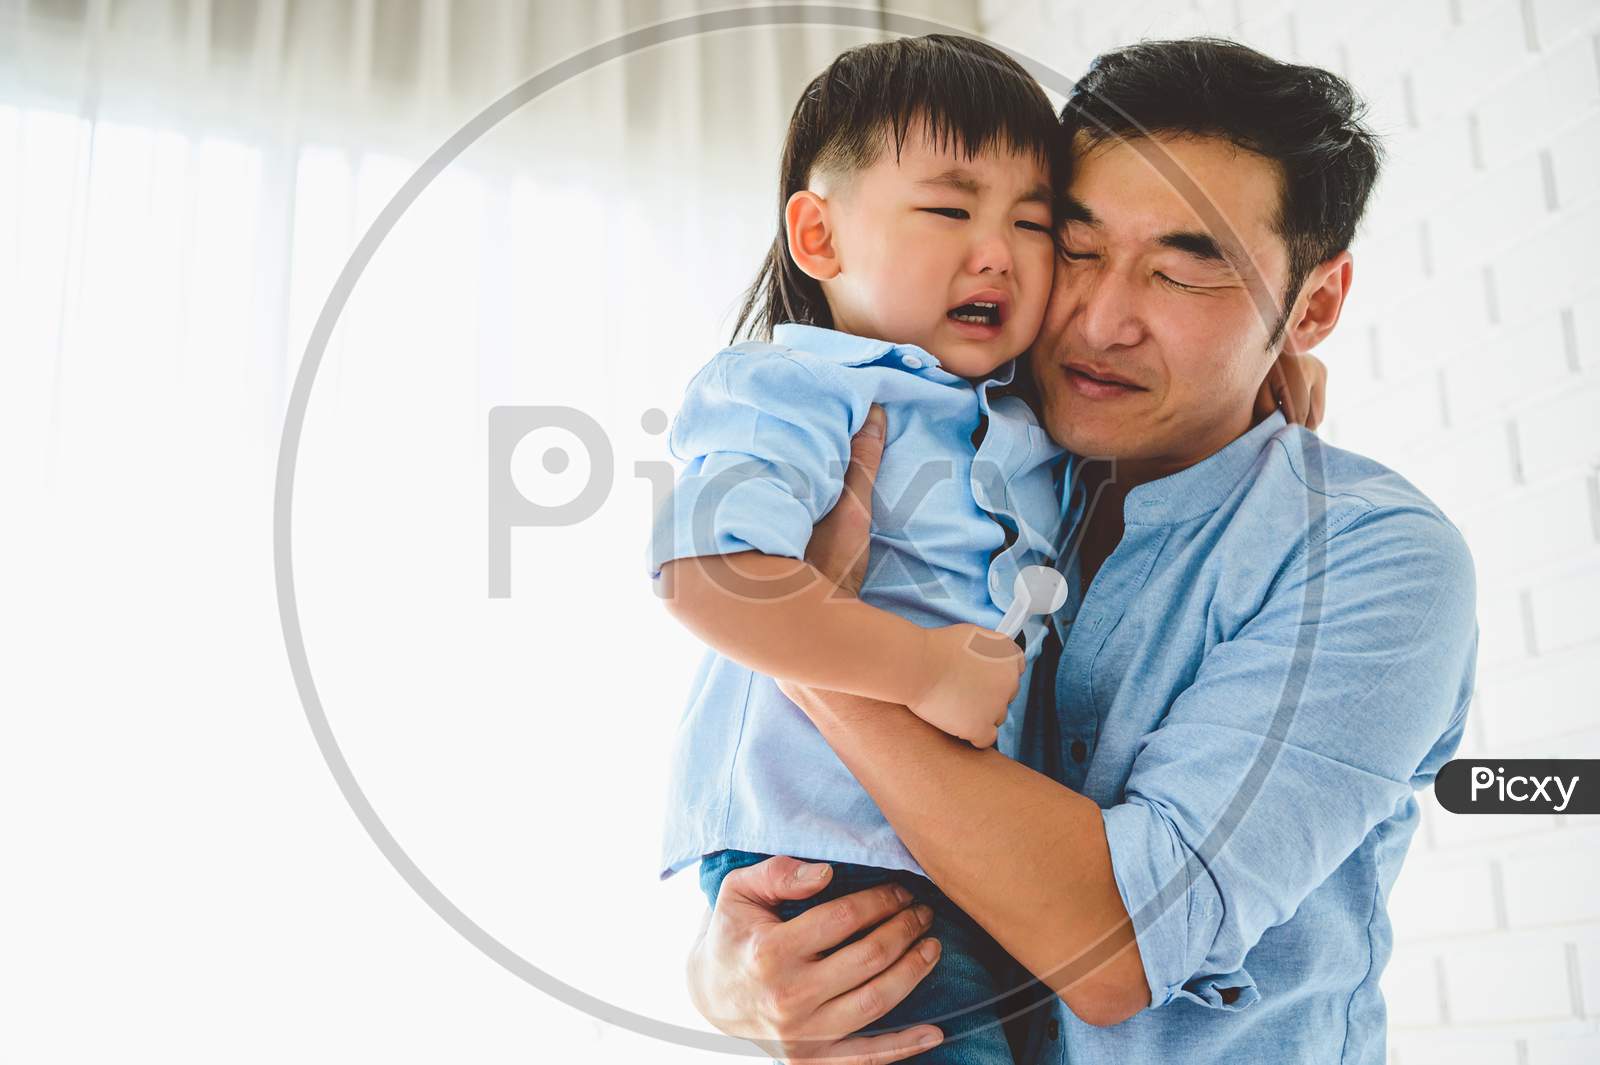 Asian Japanese Father Carrying And Consoling His Crying Son In Bedroom At His Home With Window And White Curtain Background. People Lifestyle Health. Quarantine In Covid-19 Or Coranavirus Epidemic